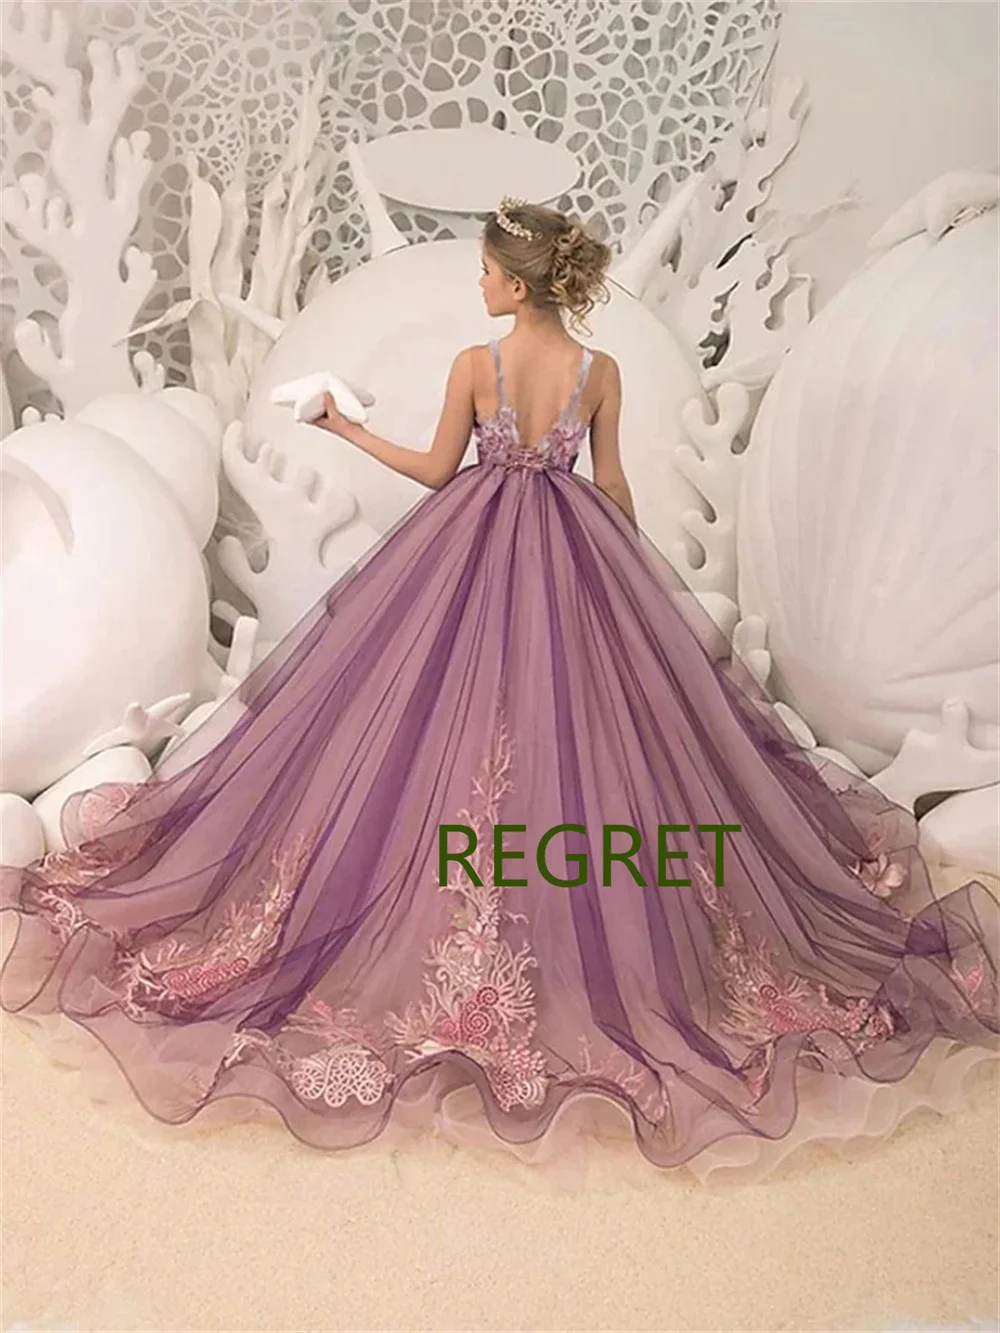 

Purple Flower Girl Dress For Wedding Tulle Applique Lace Fluffy Sleeveless Princess Birthday Party First Communion Ball Gowns